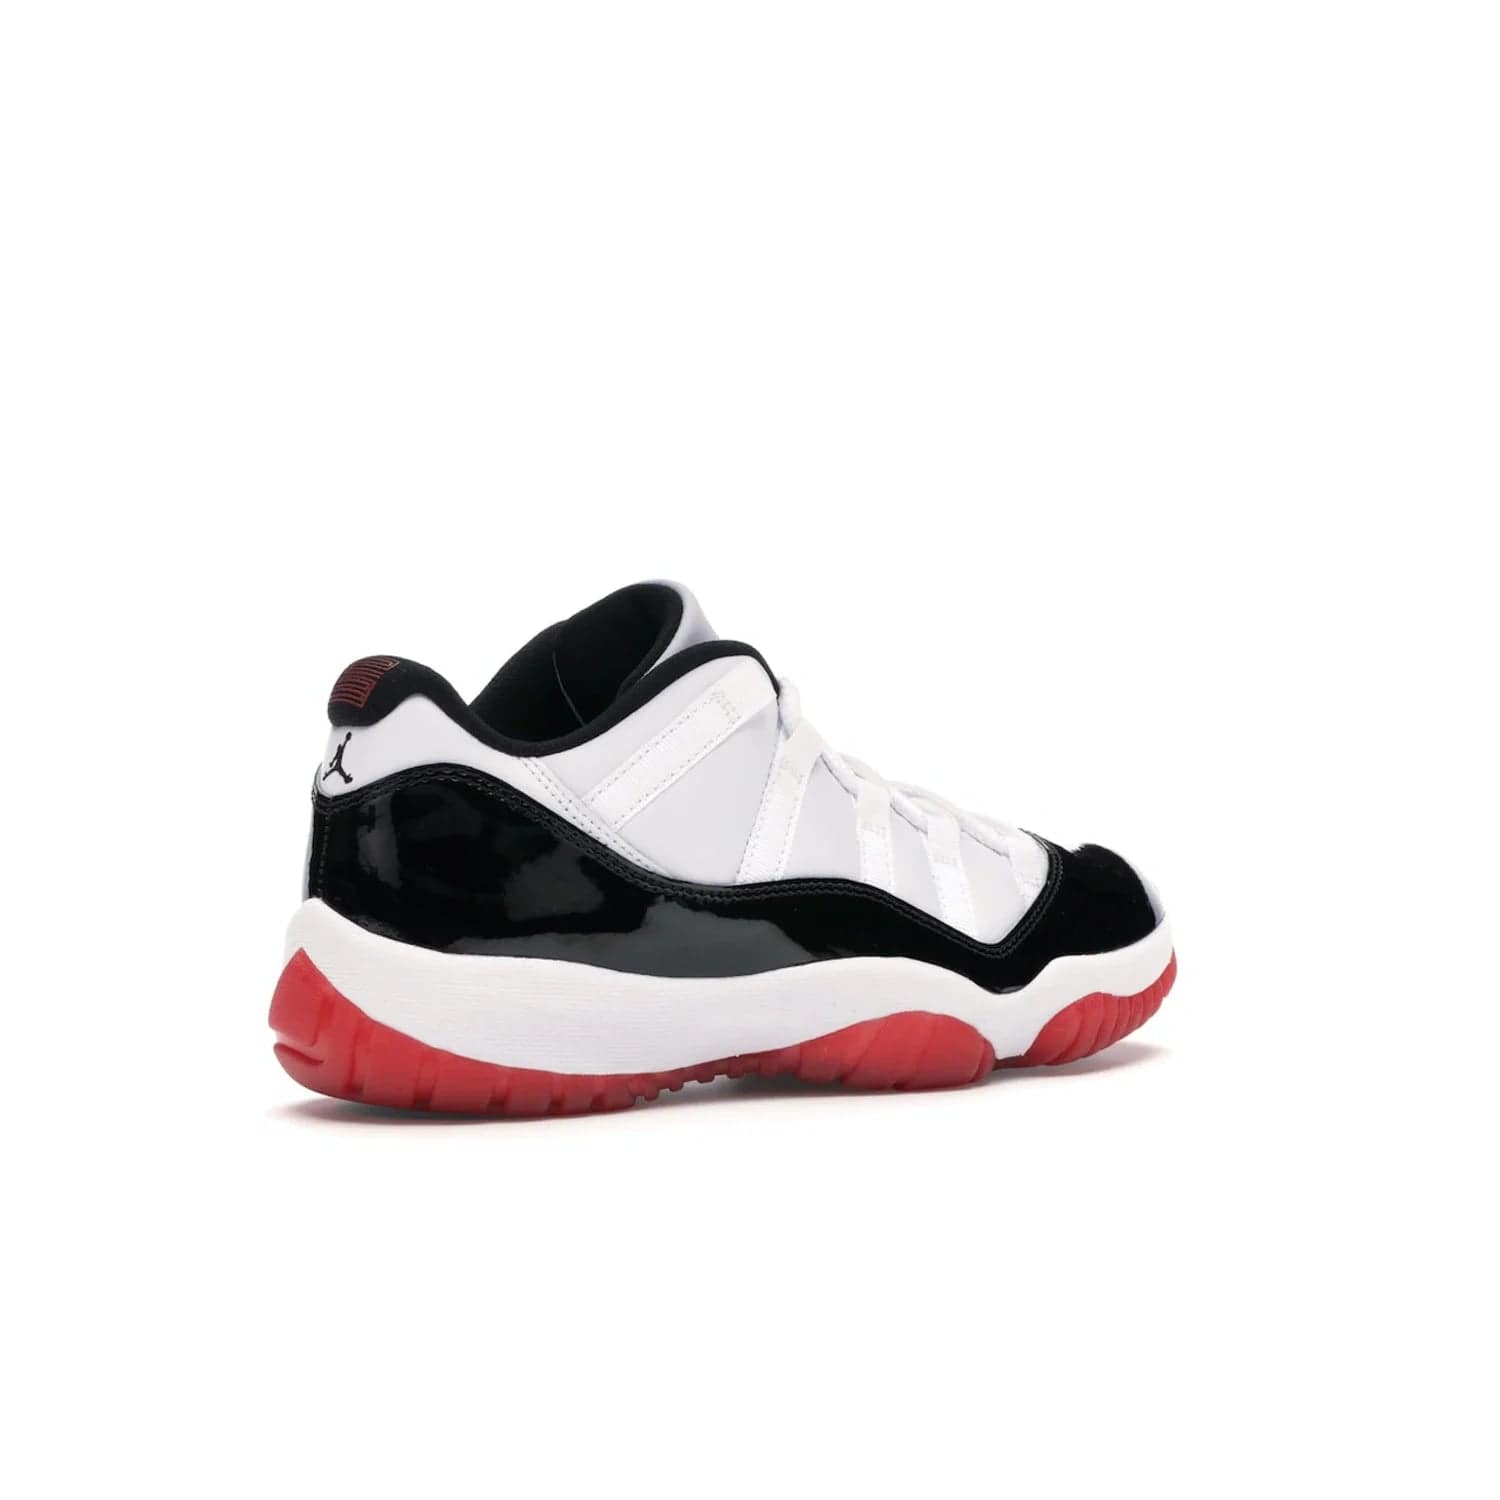 Jordan 11 Retro Low Concord Bred - Image 33 - Only at www.BallersClubKickz.com - Grab the classic Jordan 11 look with the Jordan 11 Retro Low Concord Bred. With white and black elements and the iconic red outsole of the Jordan 11 Bred, you won't miss a beat. Released in June 2020, the perfect complement to any outfit.